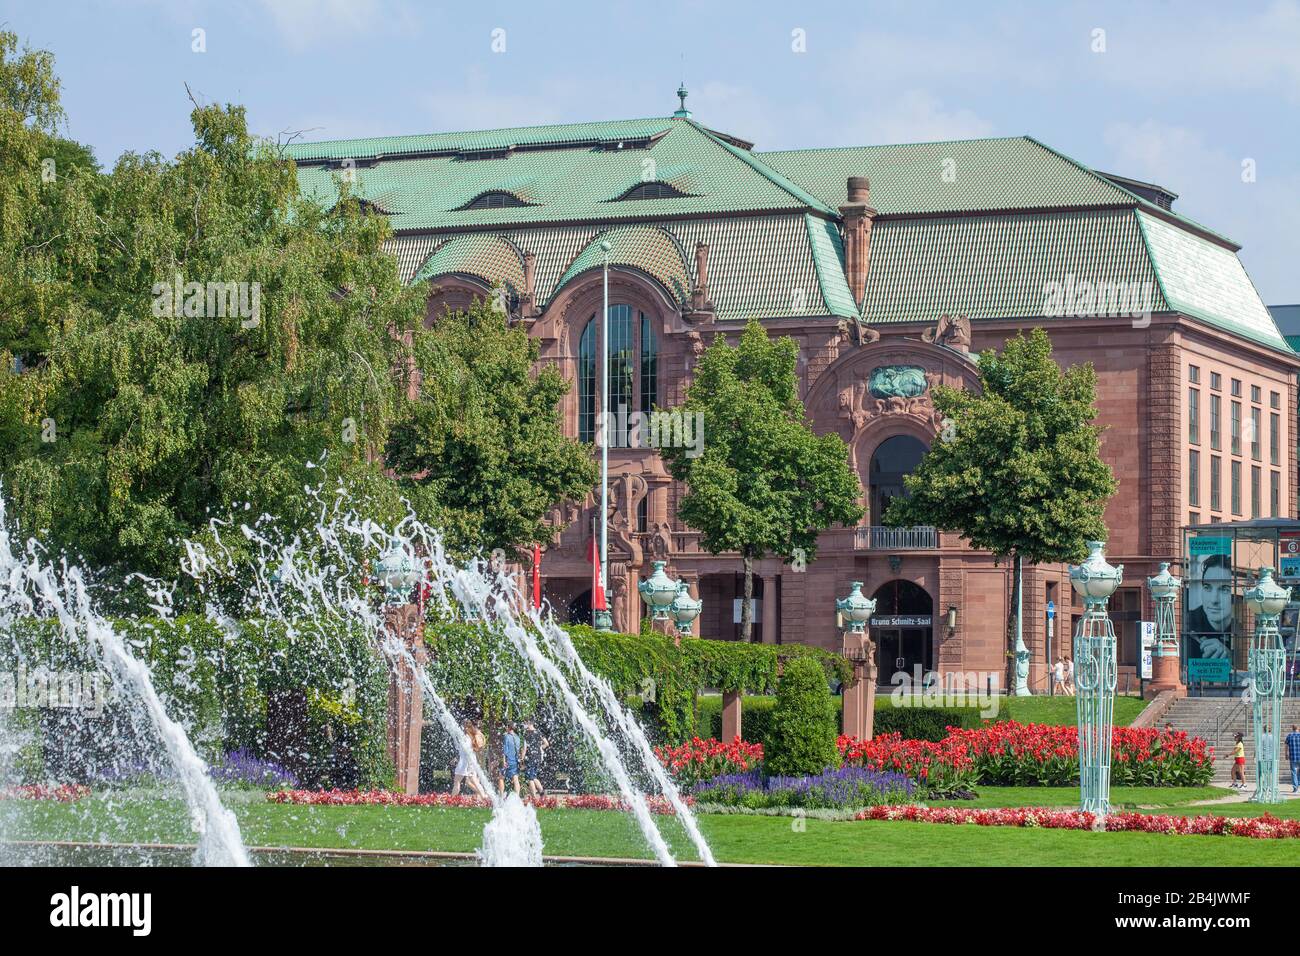 Wasserspiele High Resolution Stock Photography and Images - Alamy